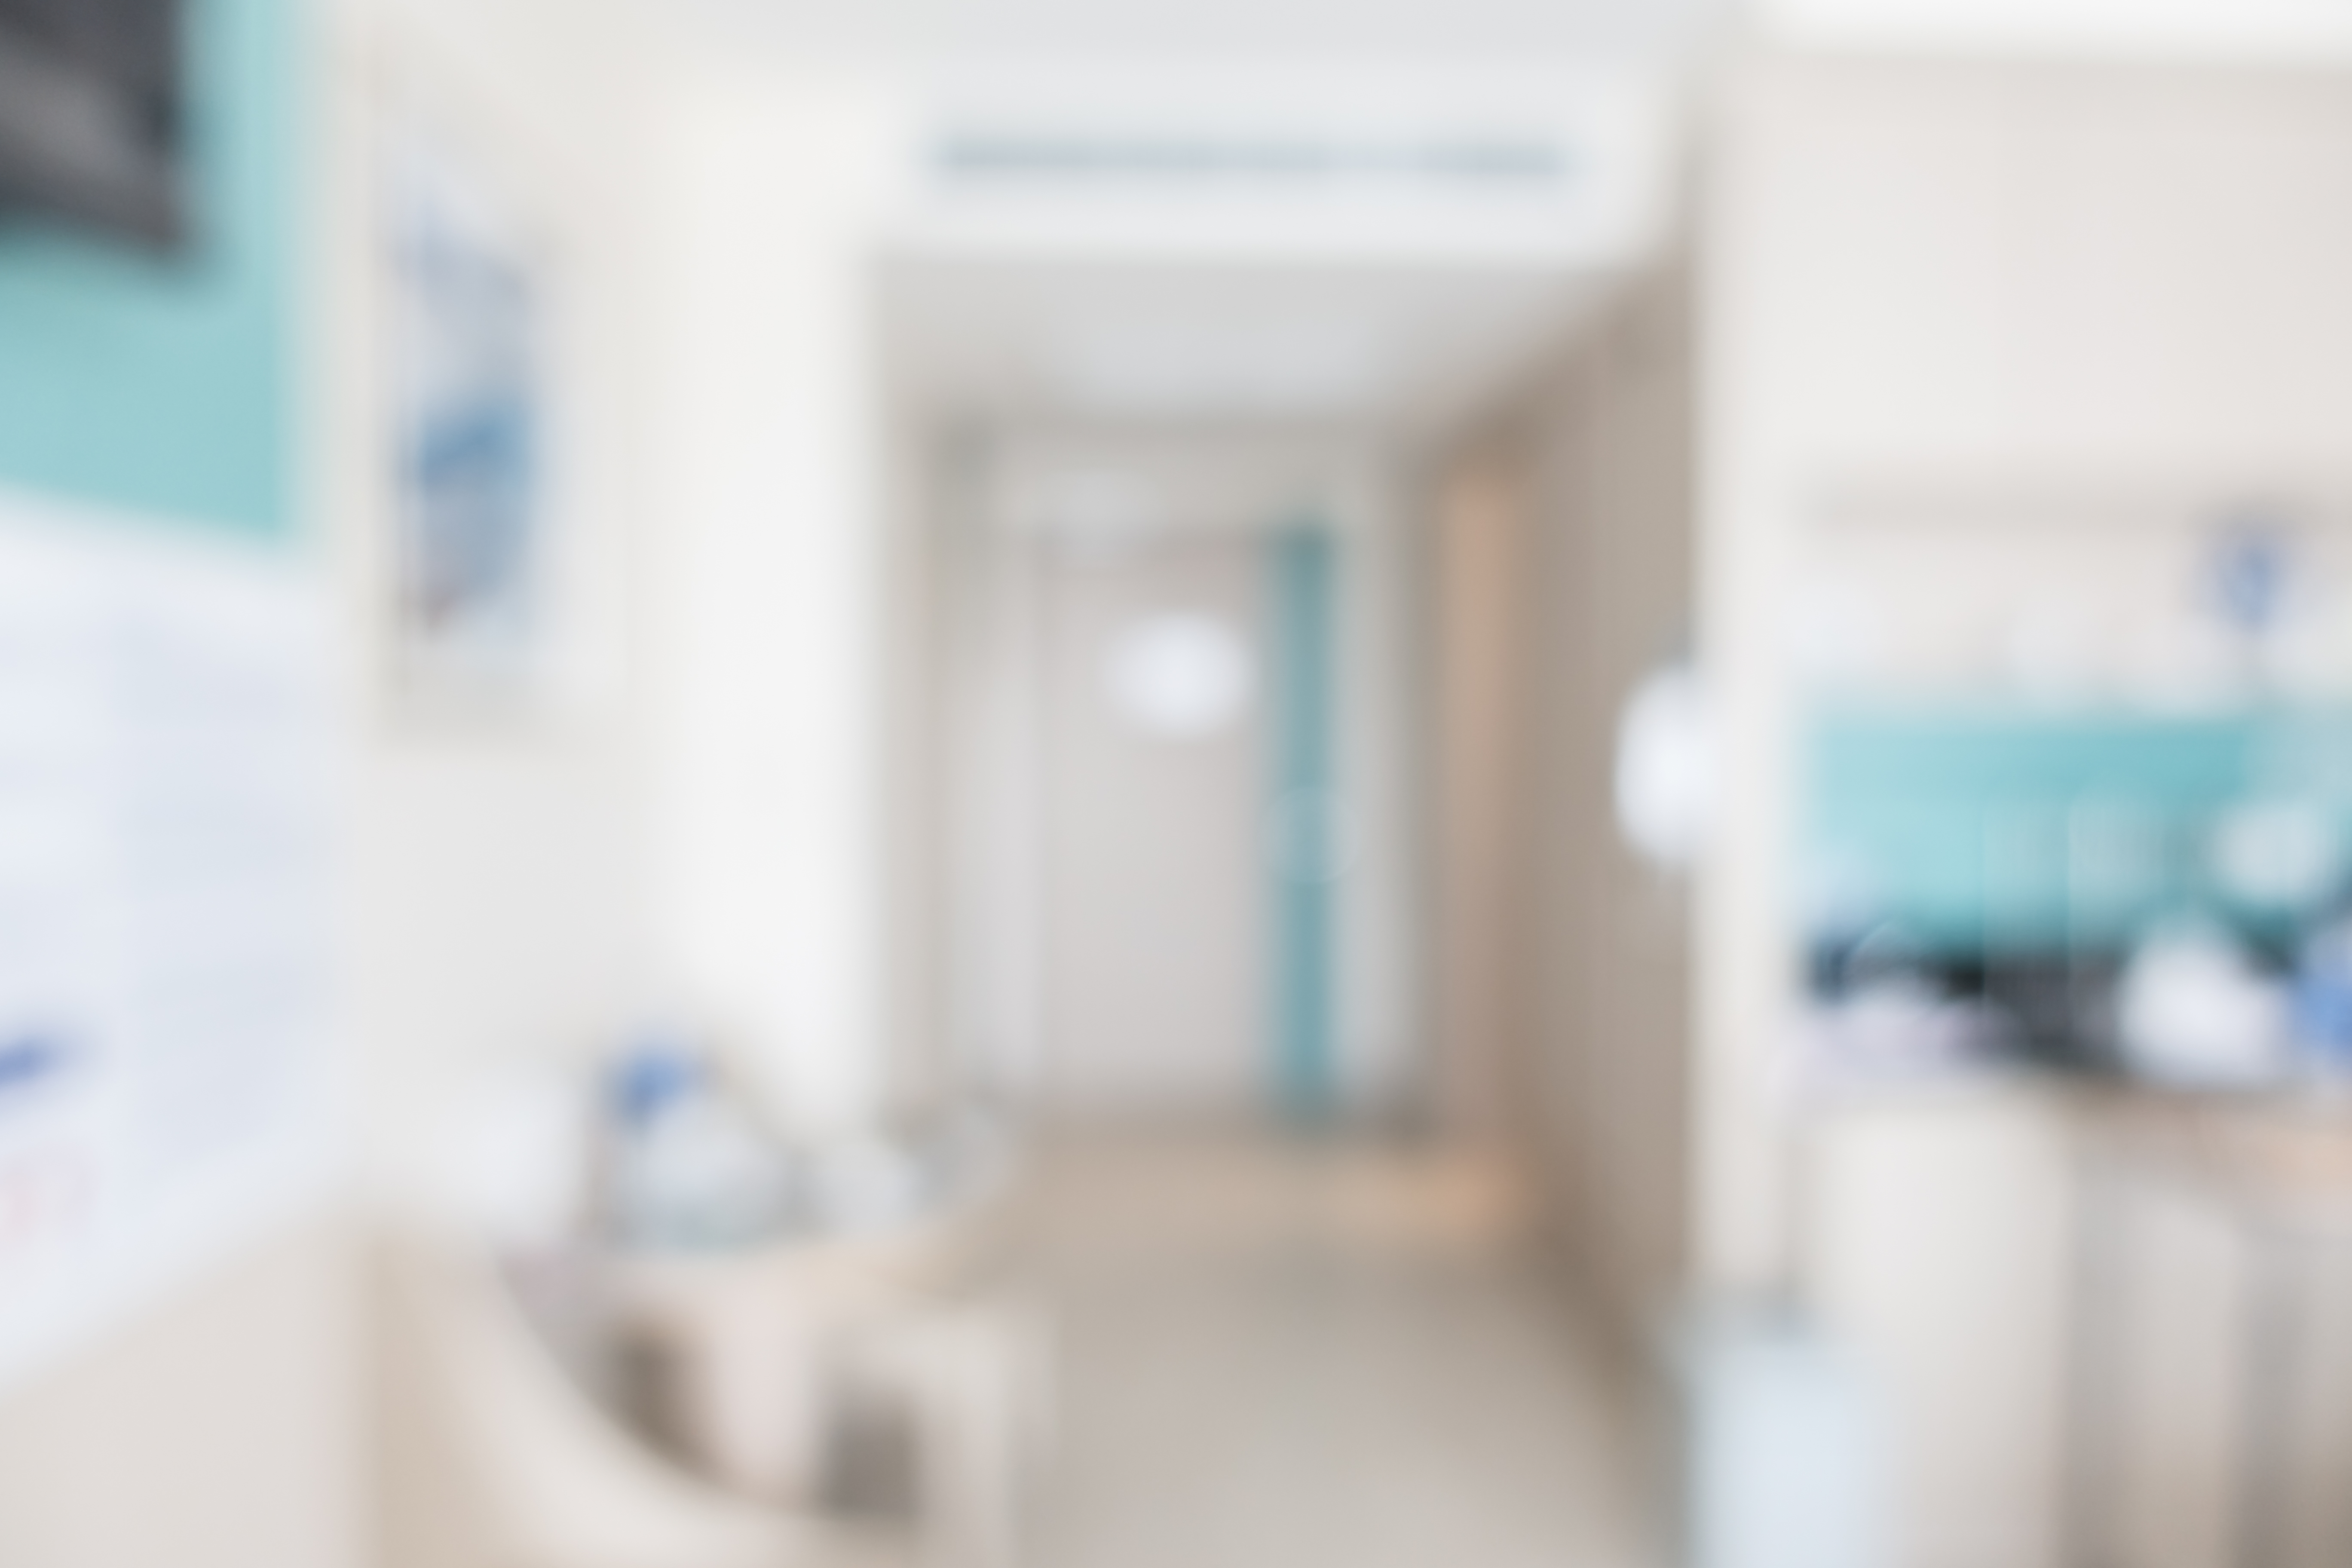 Abstract blur of a hospital room | Source: Shutterstock